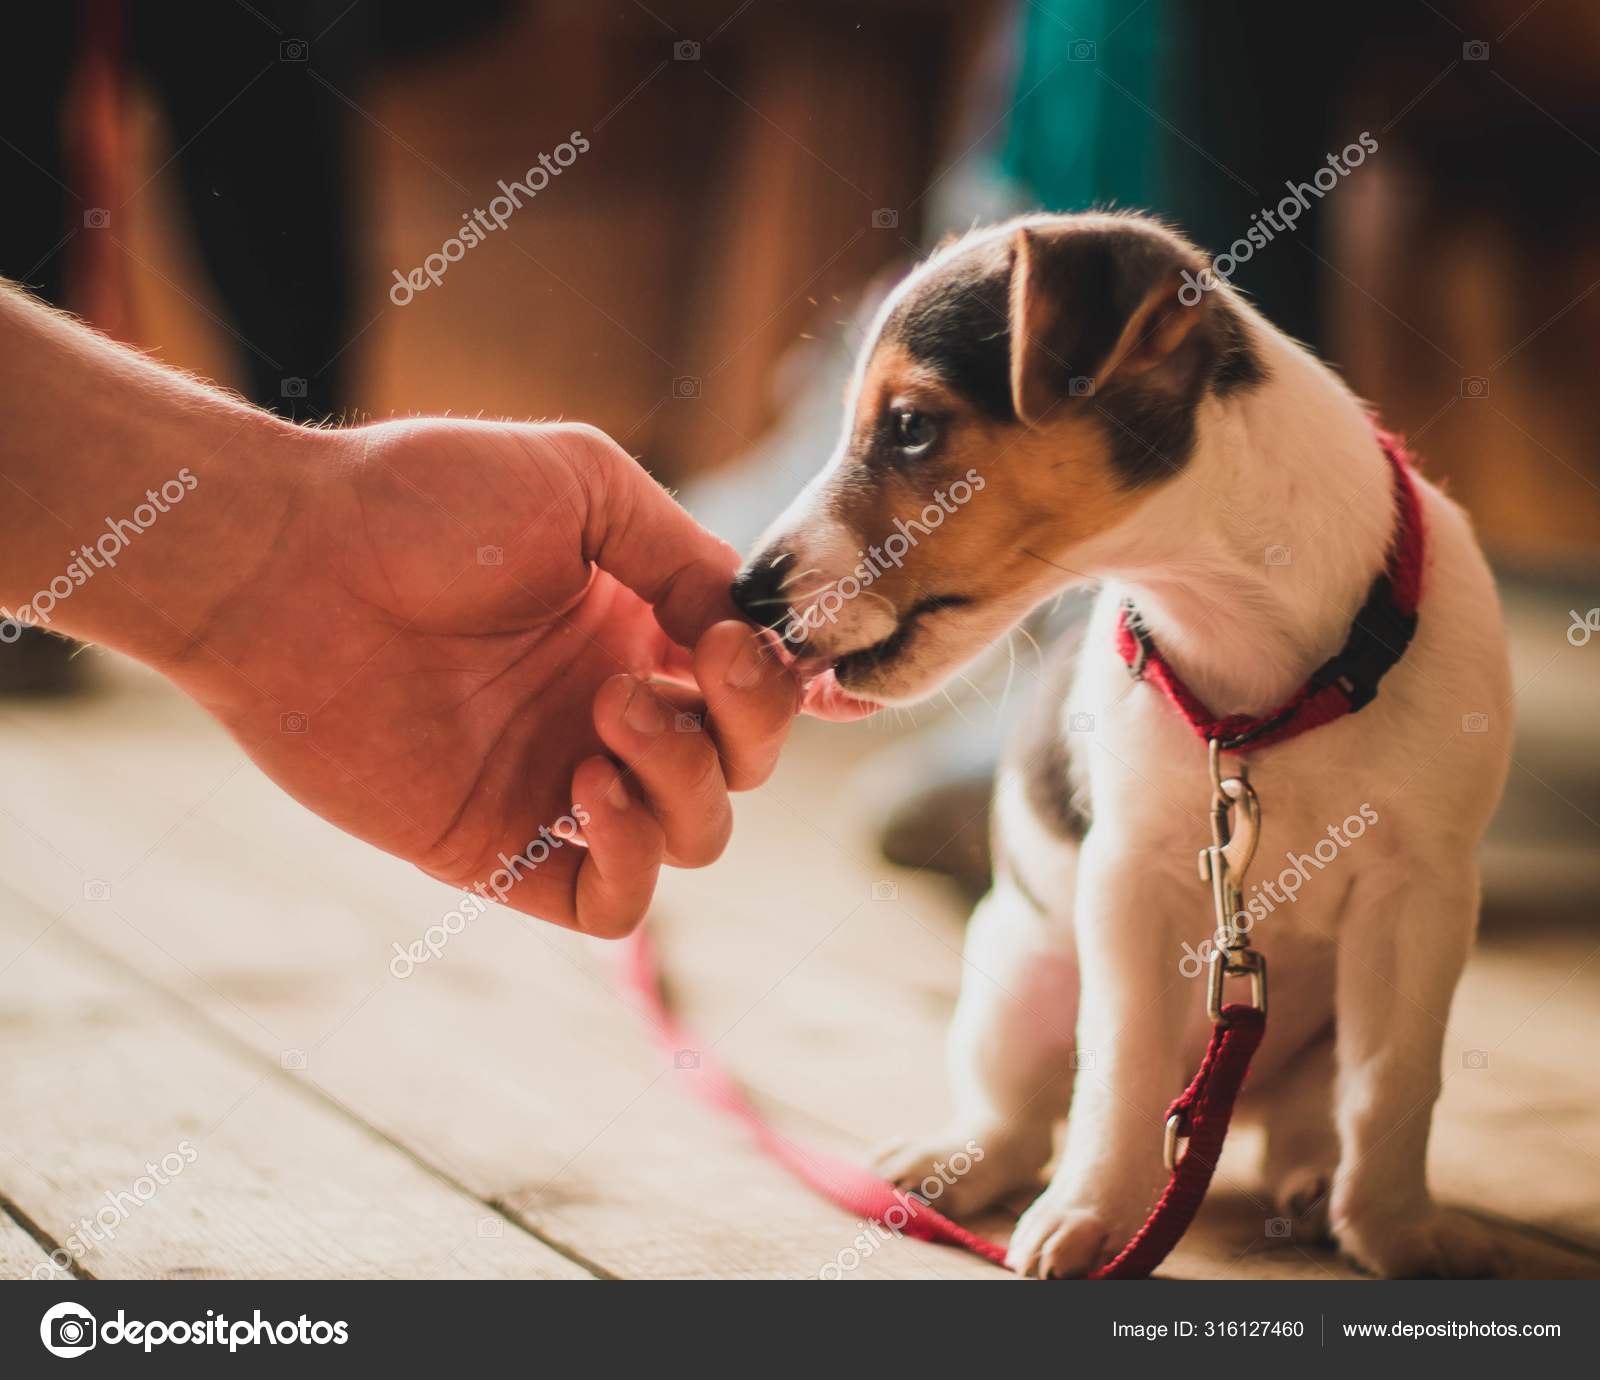 Closeup shot of a male hand touching a cute white puppy with a